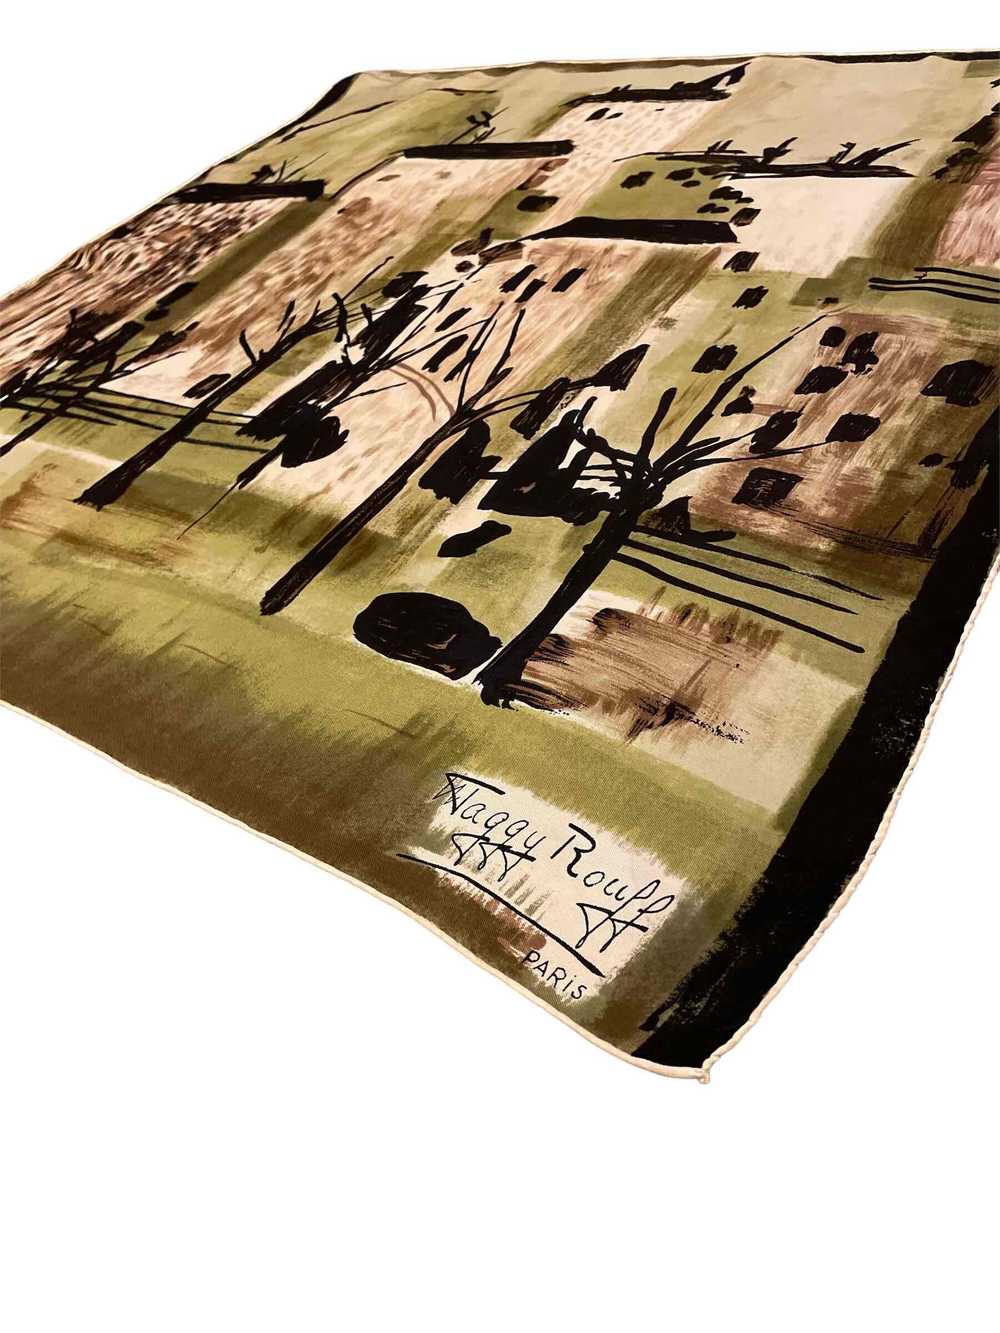 Silk scarf - Maggy Rouff 50s landscape scarf blac… - image 2